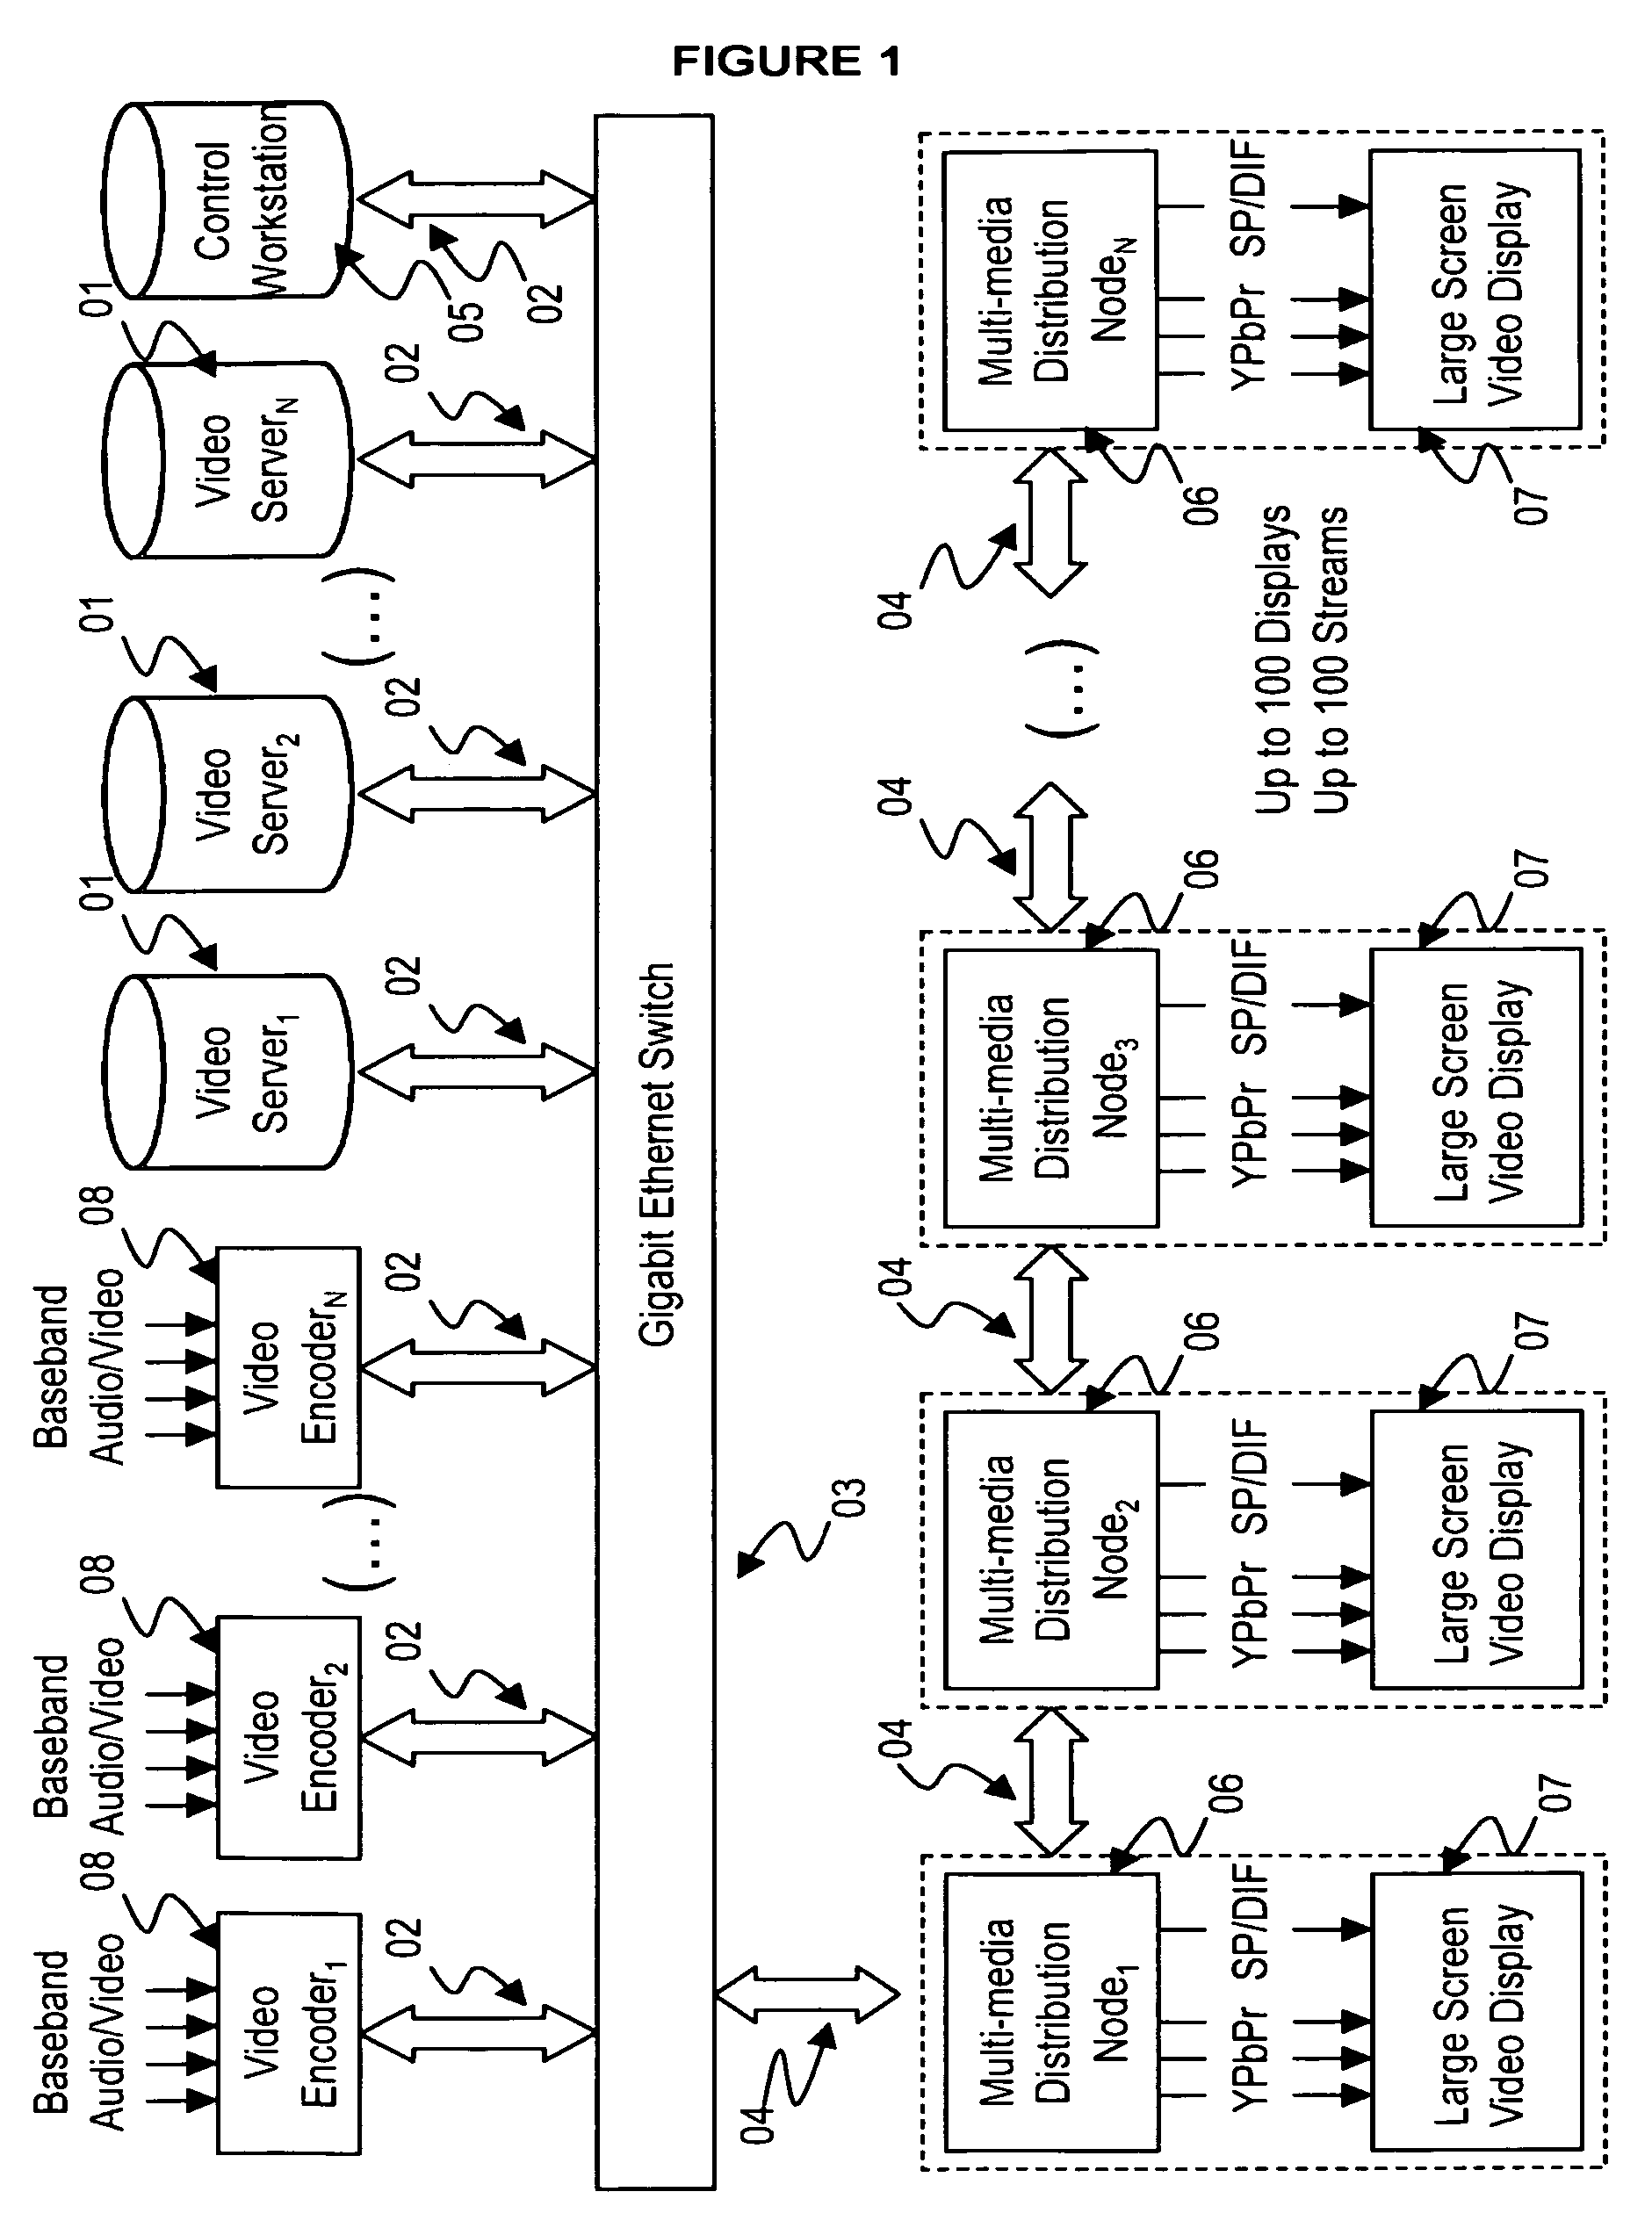 System for distribution of numerous streams of multimedia content to a multiplicity of video displays